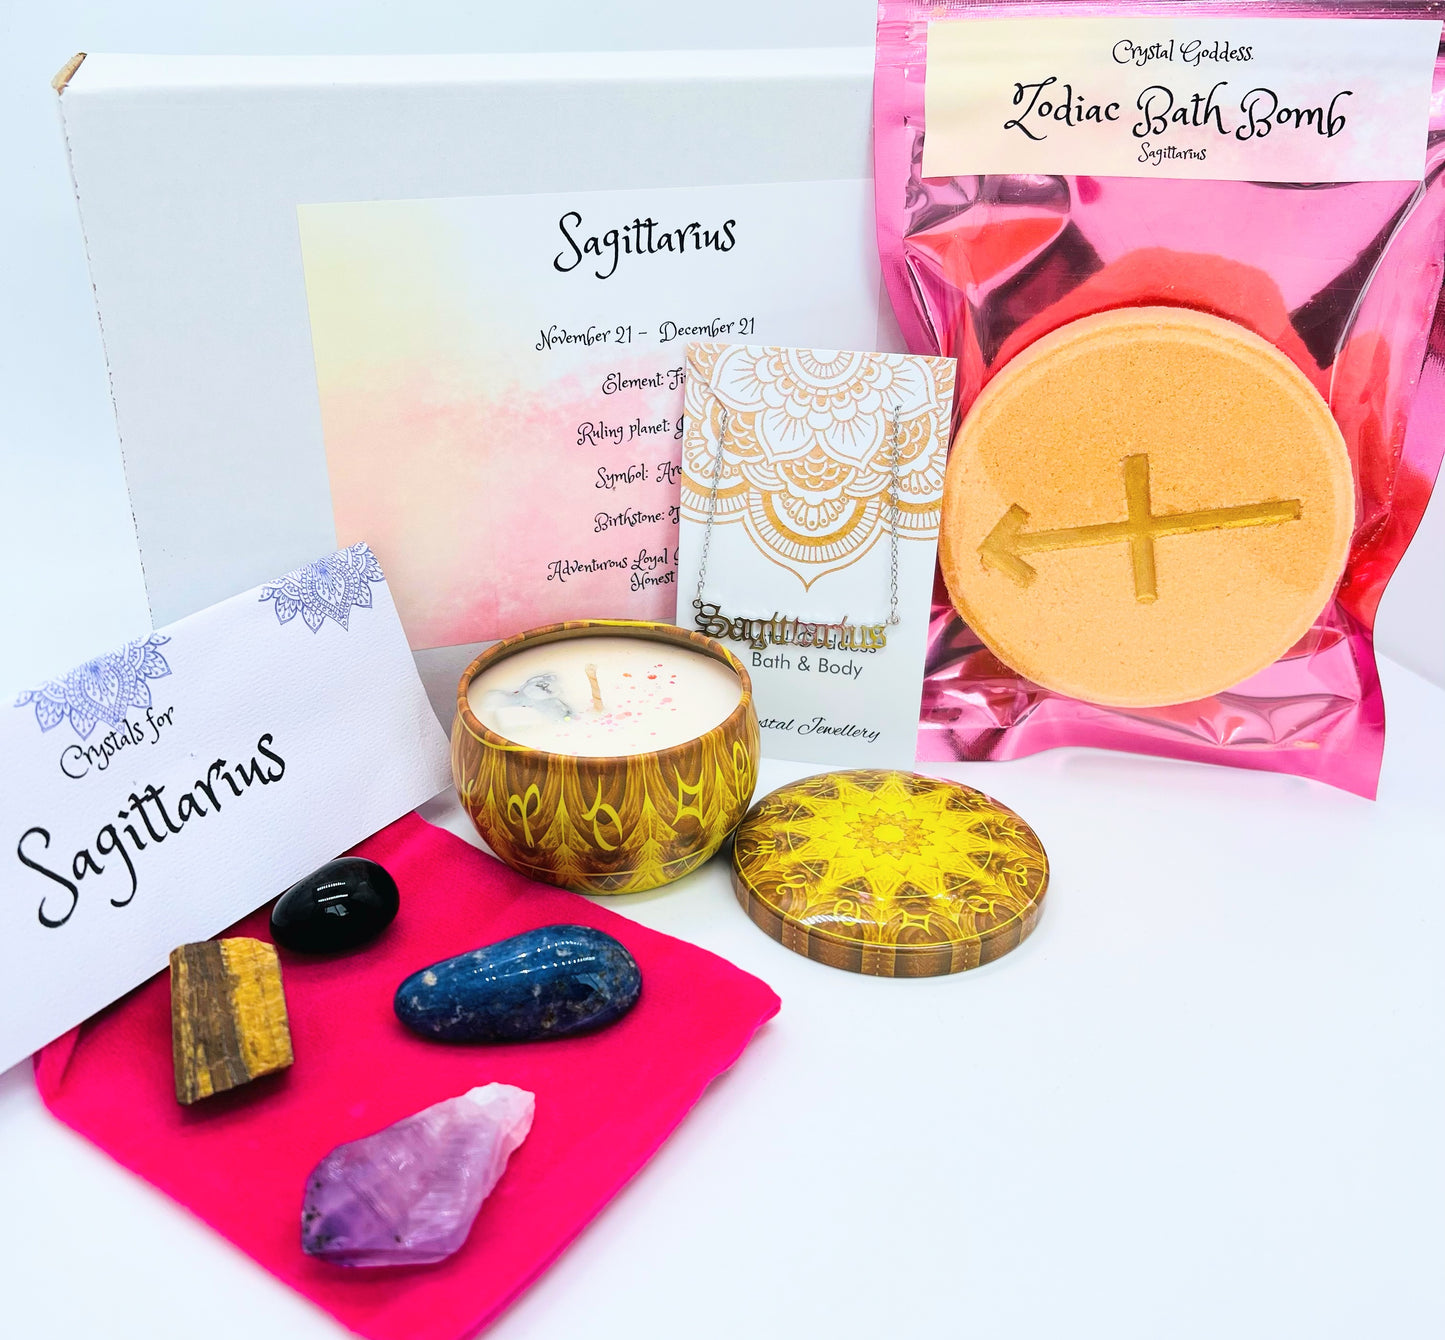 Sagittarius zodiac gift box showing a set of four crystals, crystal candle, pendant and a bath bomb with the symbol for this sign on it.